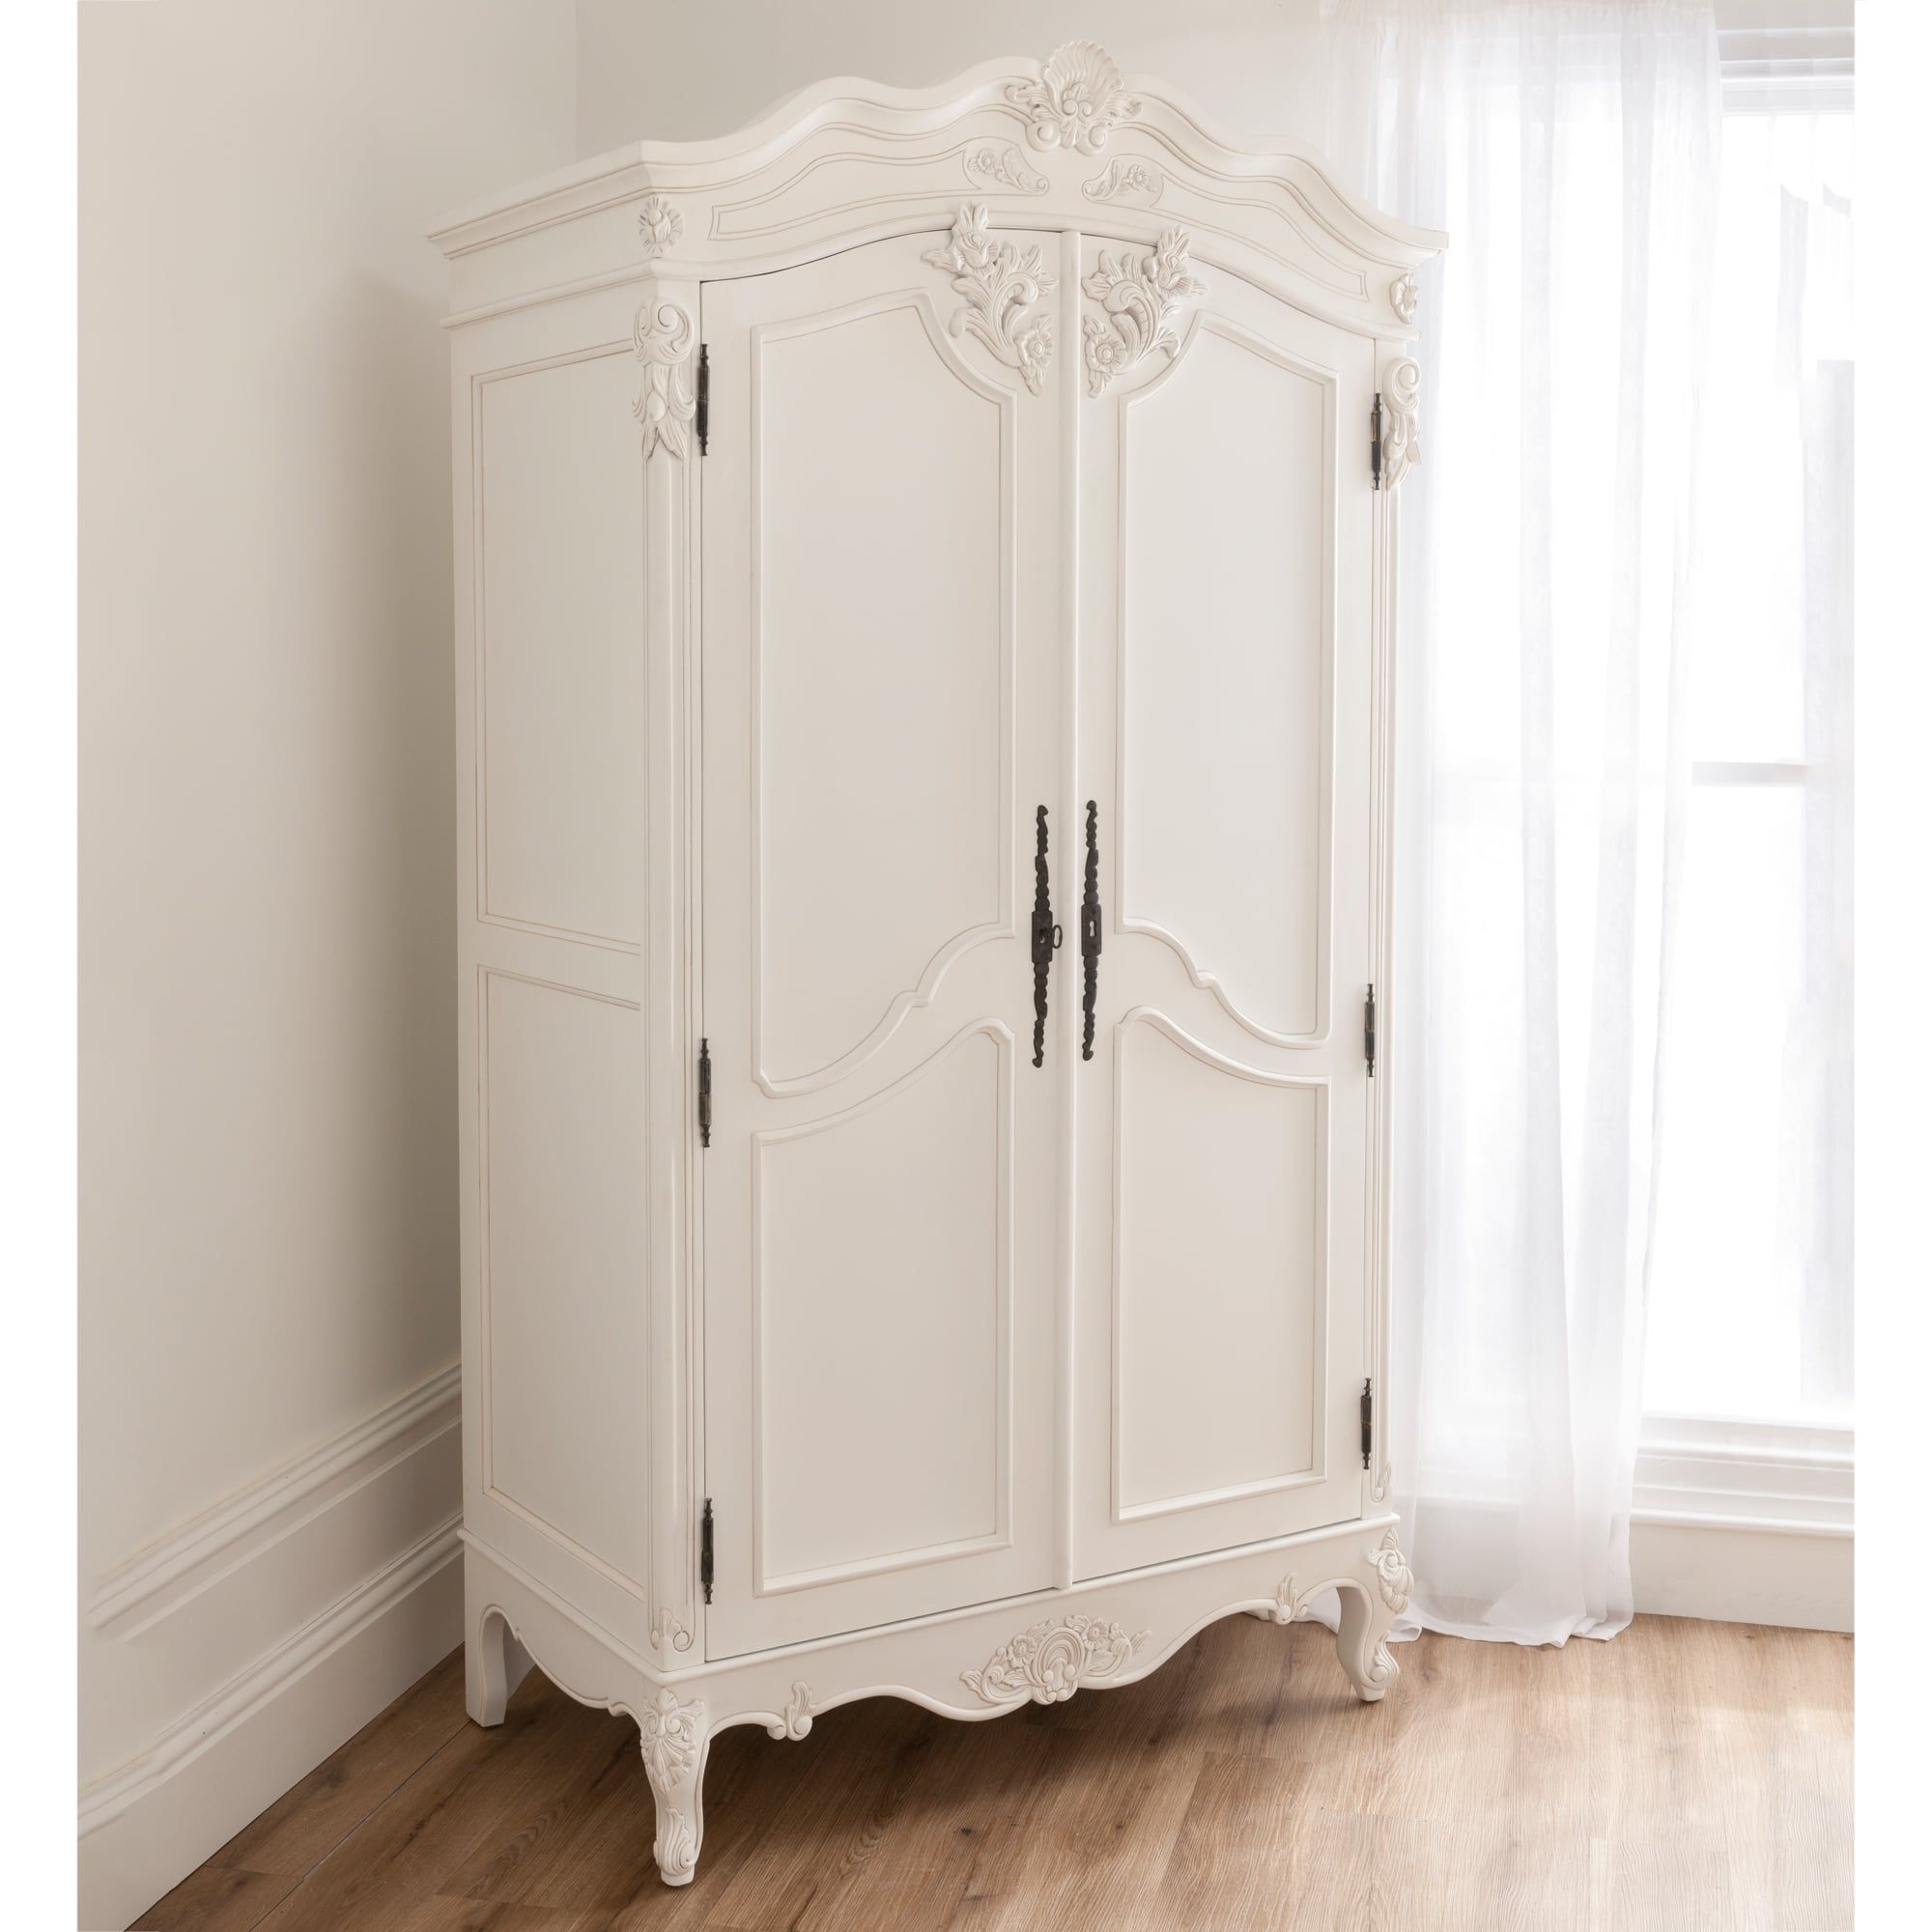 Baroque Antique French Wardrobe Is Available Online At Homesdirect365 Within French White Wardrobes (Gallery 3 of 20)